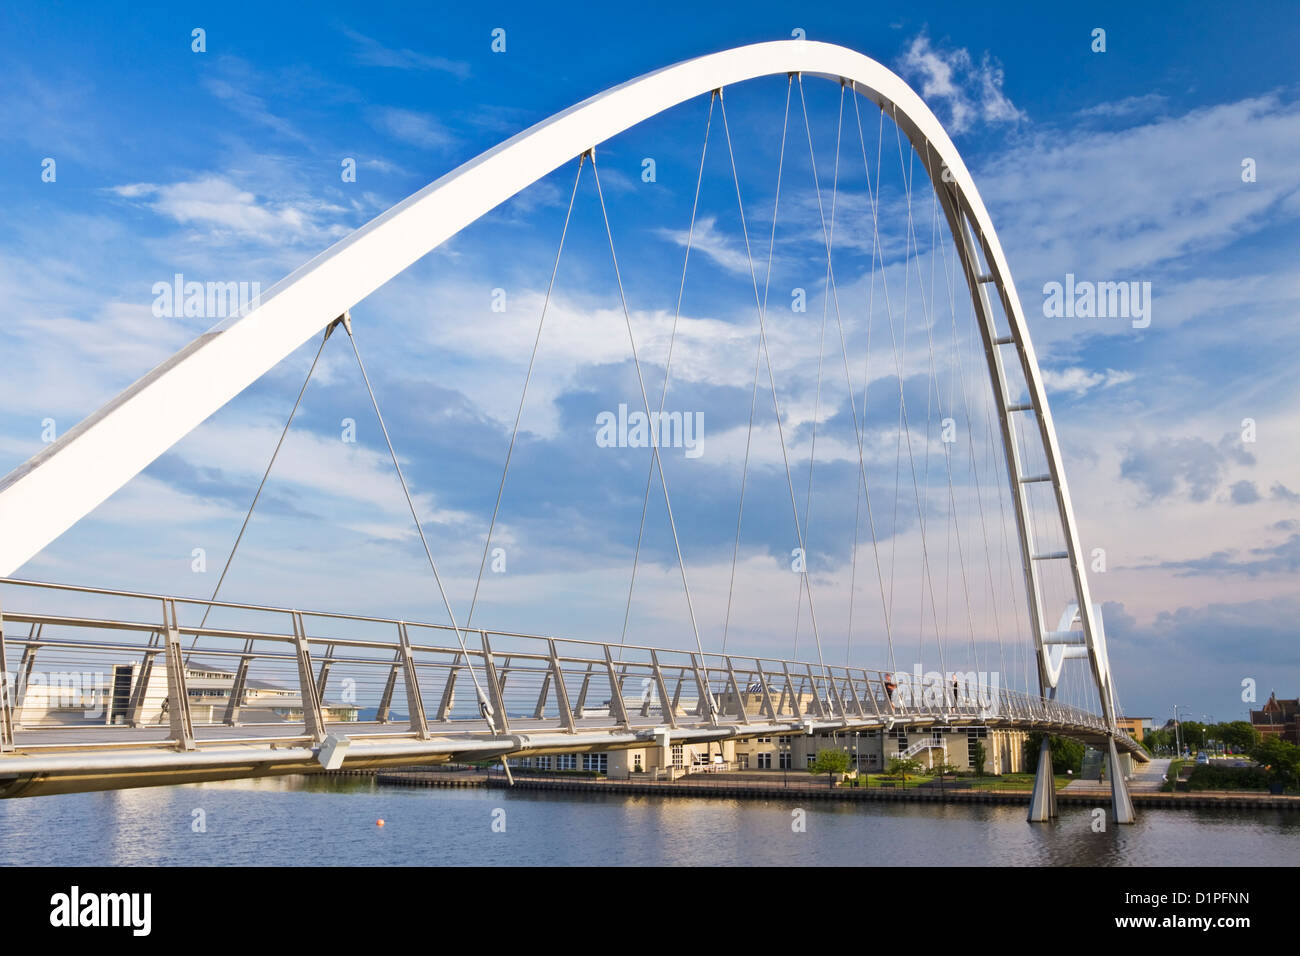 Stockton 'Infinity' Bridge, over the River Tees designed by Spence Associates and opened in 2009, Teesside, England Stock Photo